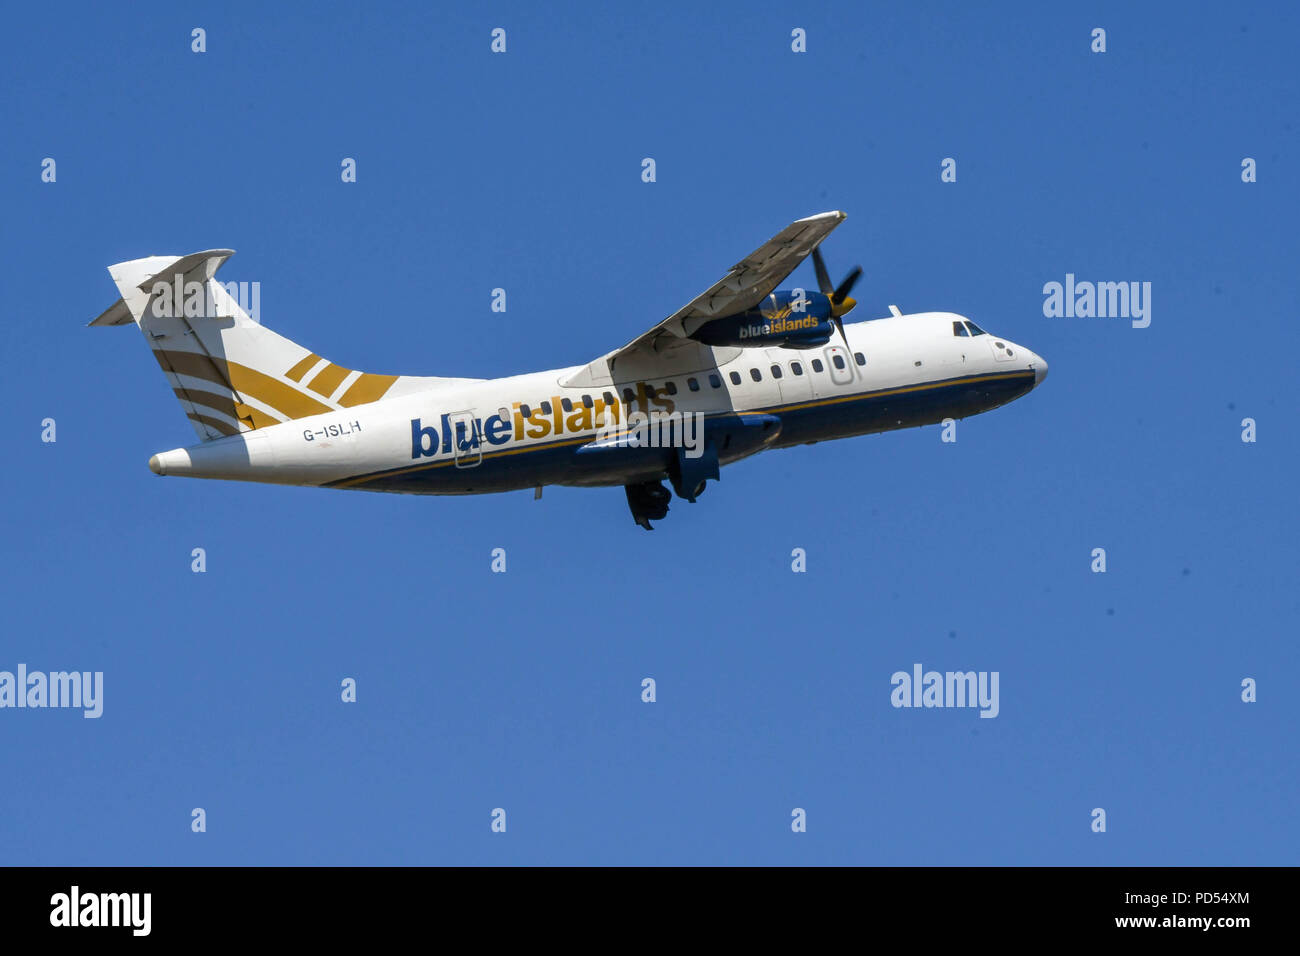 Blue islands ATR-42 short haul turboprop airline taking off from Cardiff  Wales Airport Stock Photo - Alamy